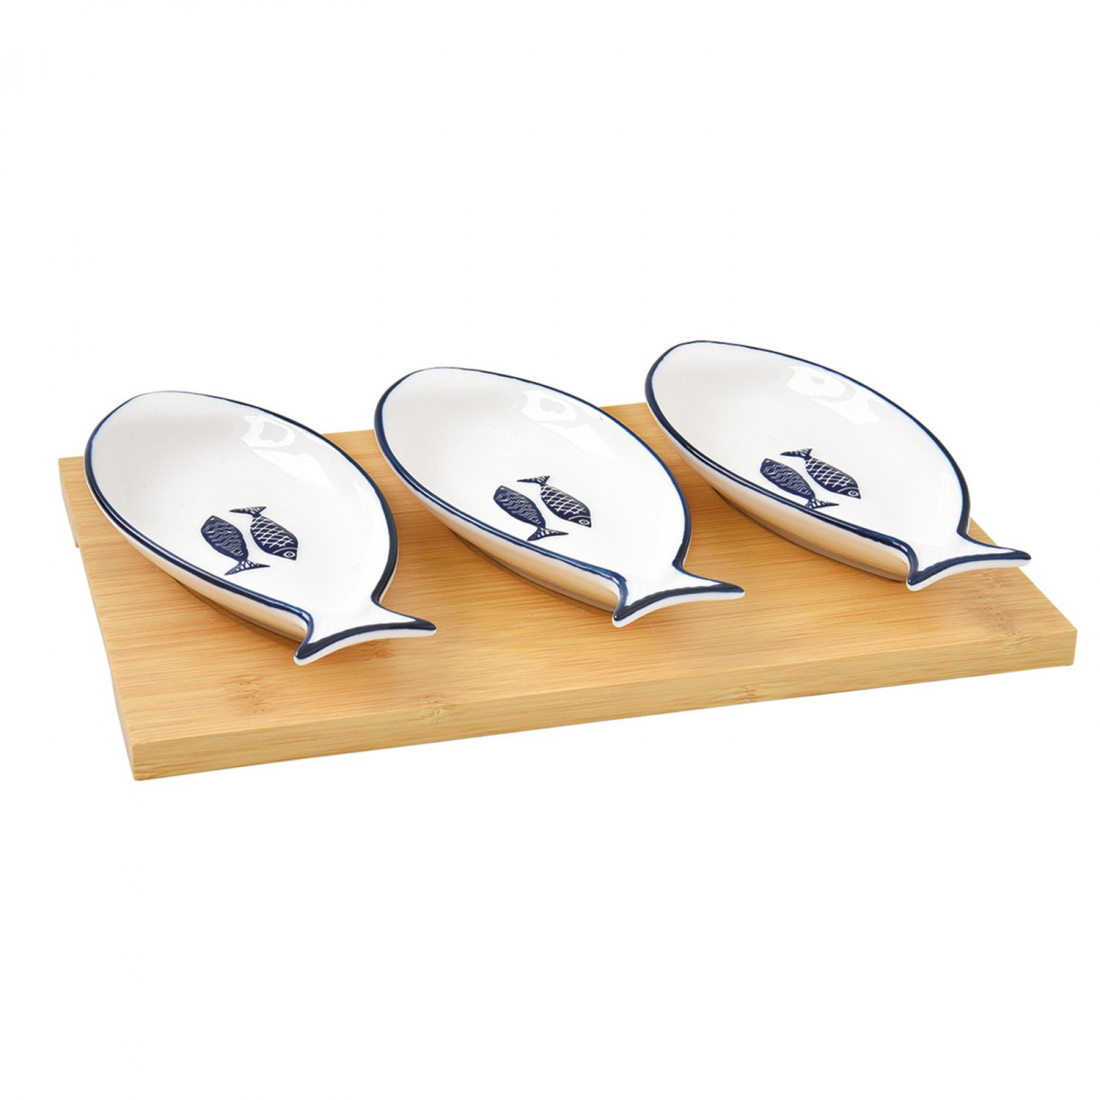 Appetizer Set With 3 Porcelain Bowls On Bamboo Tray in Colour Box 28X19cm Sea Shore